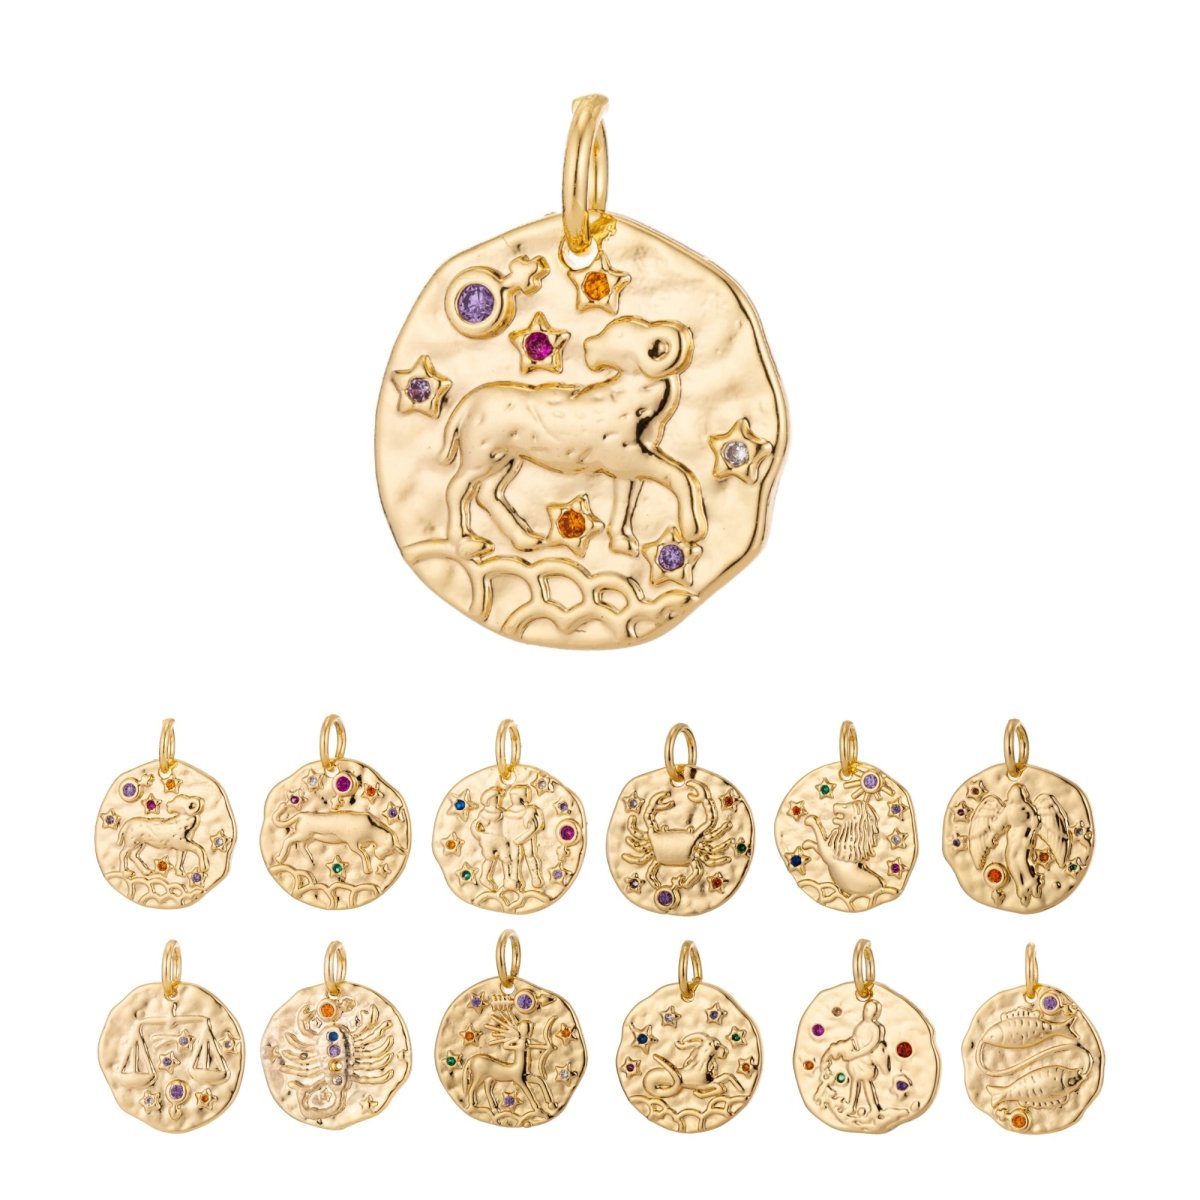 Dainty 18k Gold Filled Charm Coin Medallion Gem Stone Zodiac Sign Charm for Bracelet Necklace Pendant Rustic Hammered Jewelry Making Supply A-469-A-480 A-482-A-493 - DLUXCA